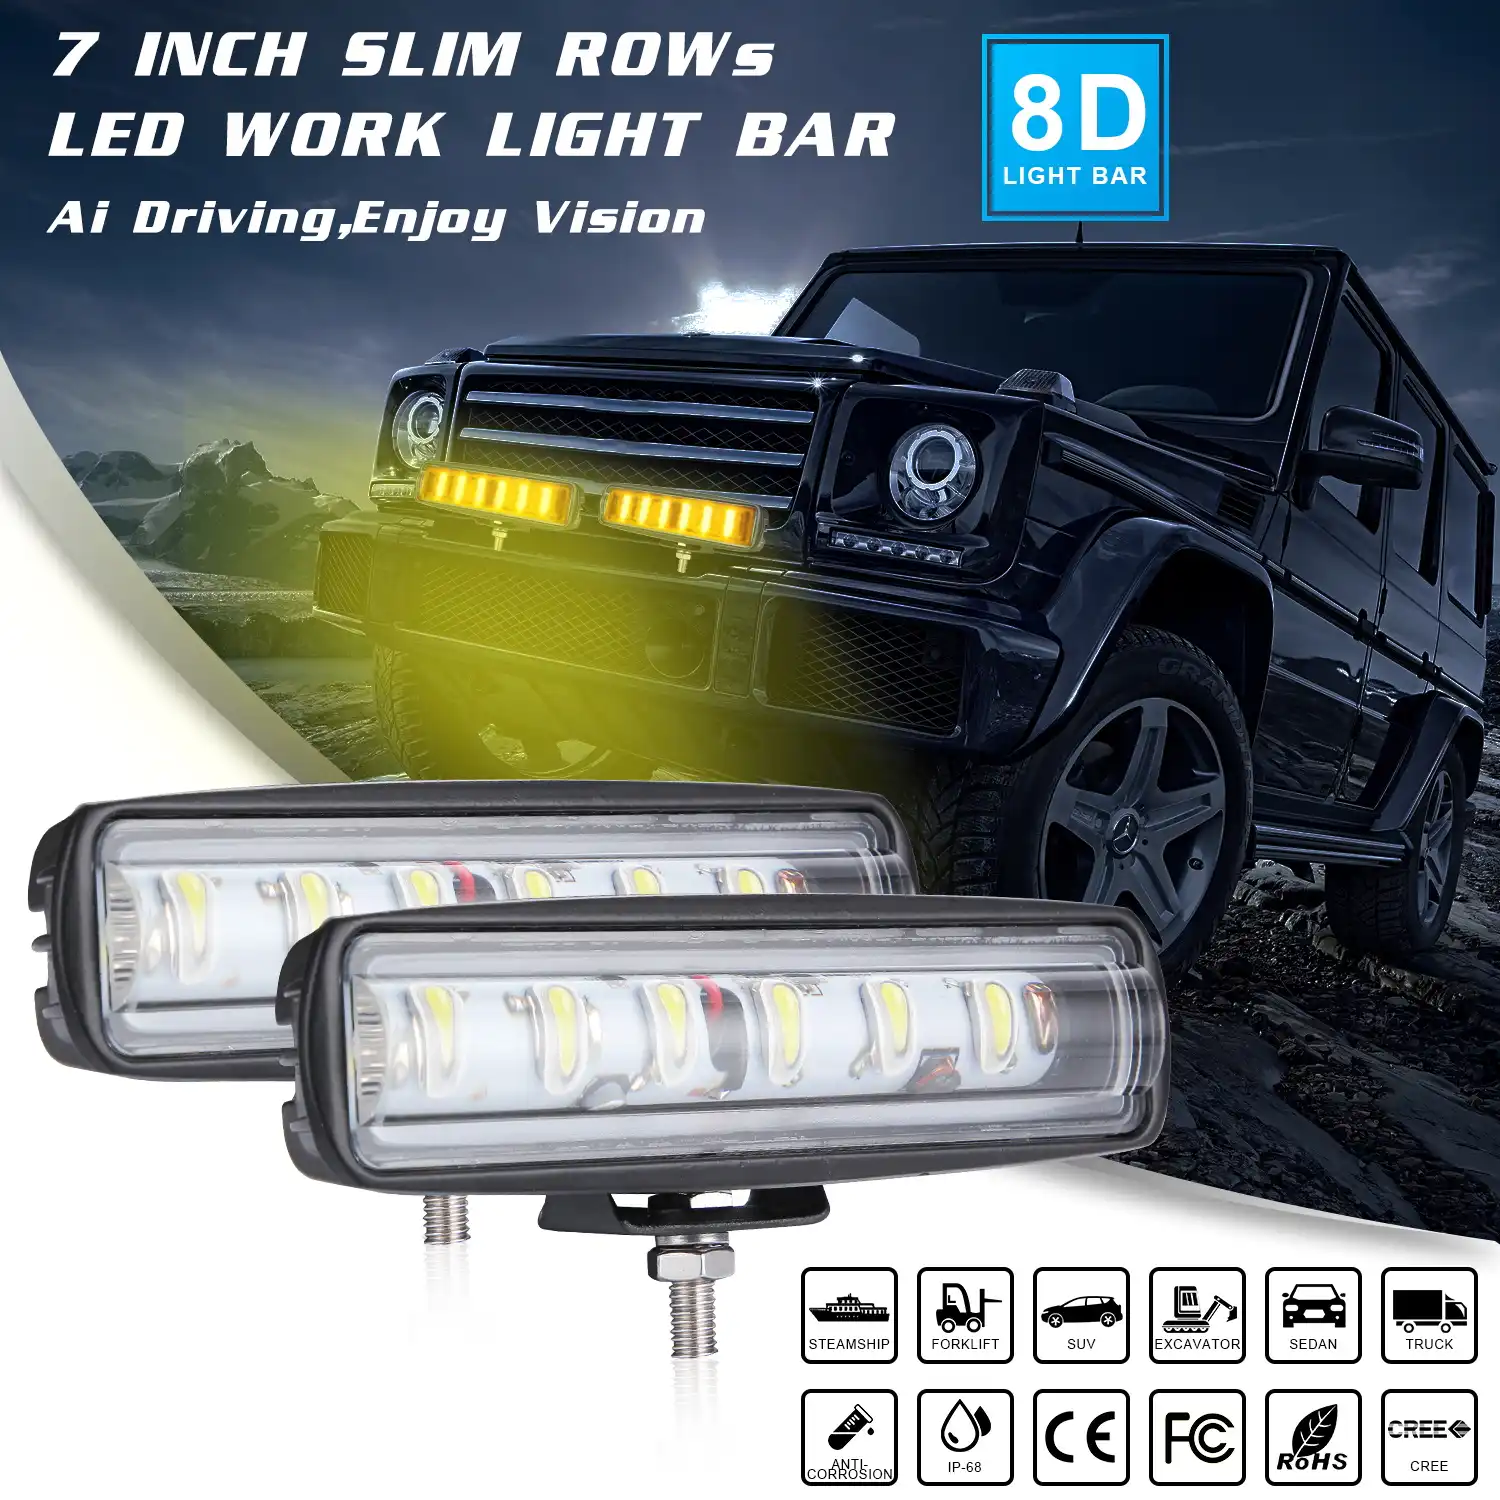 7INCH 60W Yellow Lens LED Work Light Bar Offroad Fog Driving Lamp Car 4WD Truck